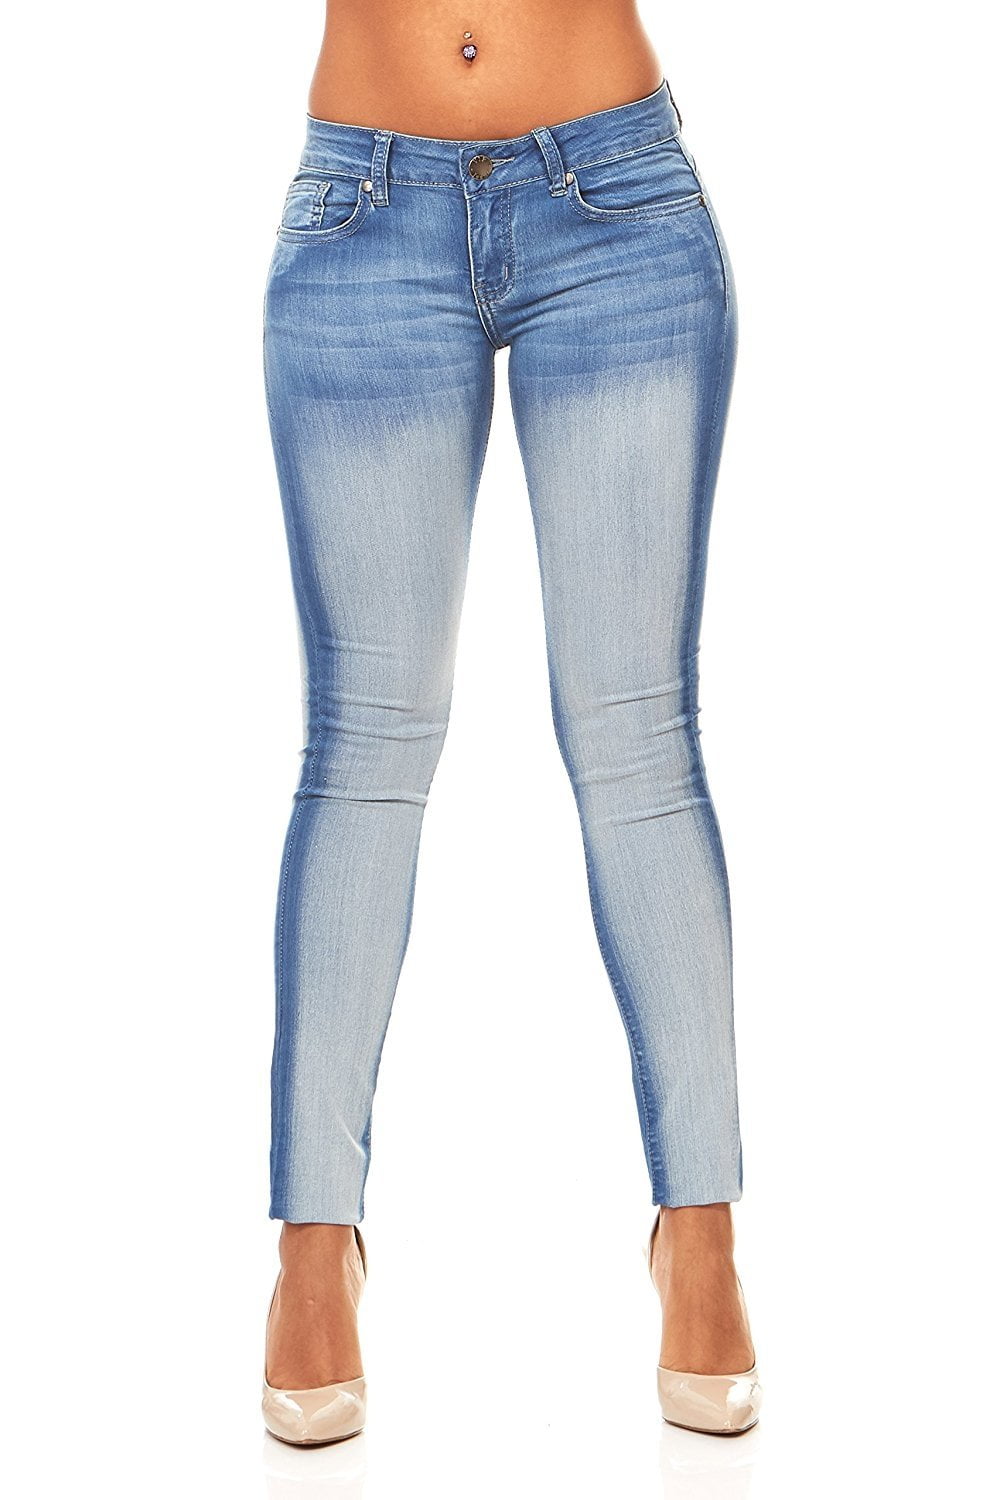 Stone Blue Sizes 7 Jeans Washed Slim Fit Women Jeans Electric Stretch Skinny for Classic Juniors